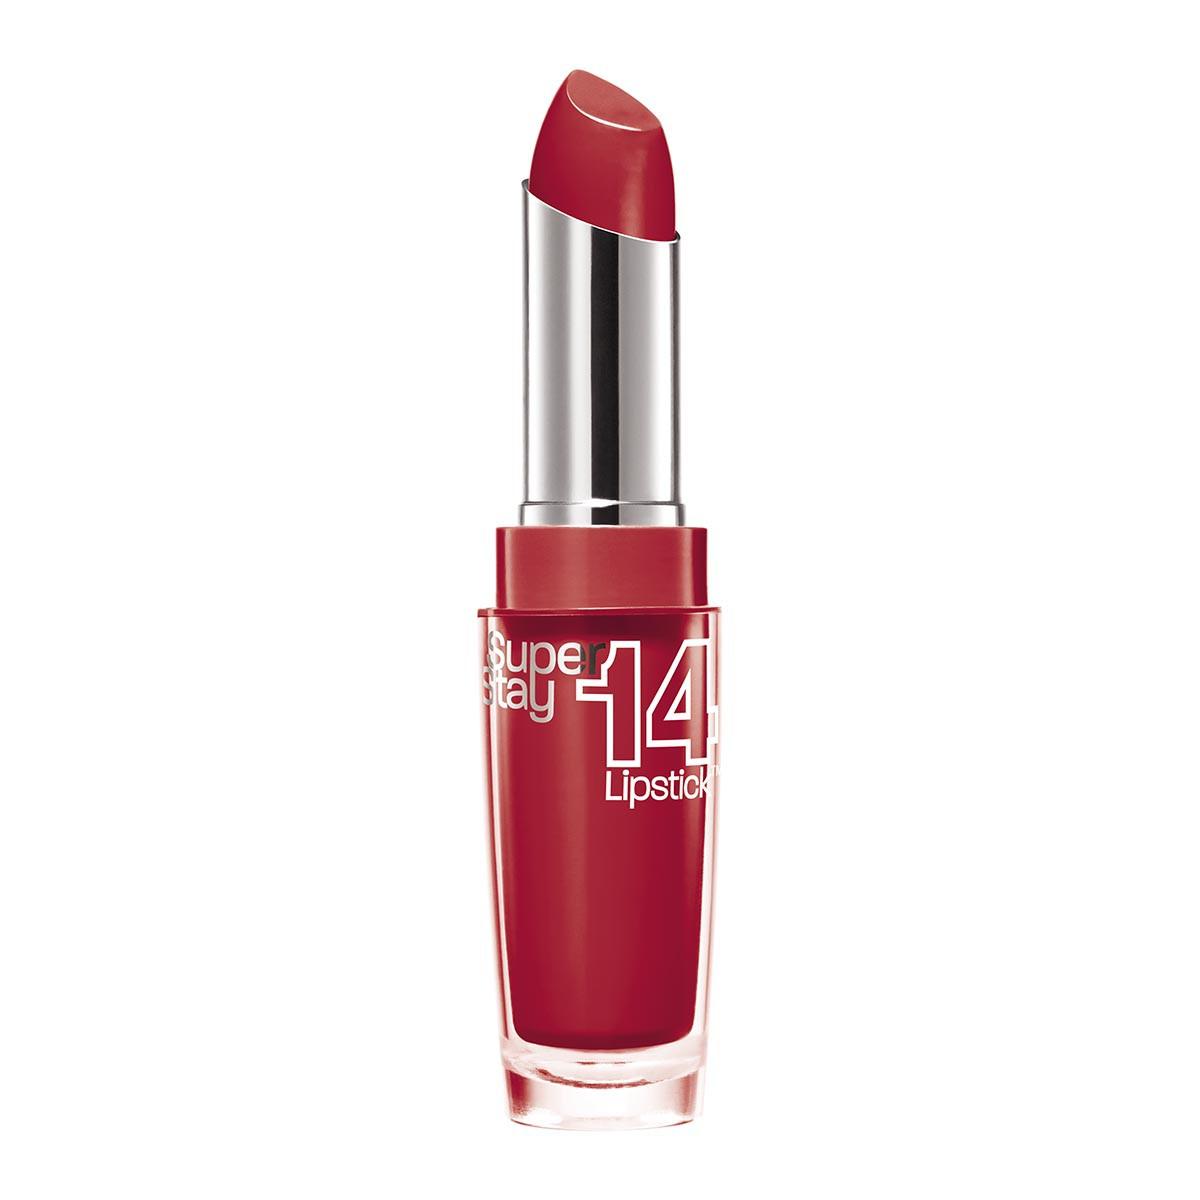 maybelline-superstay-14h-lipstick-510-non-stop-red